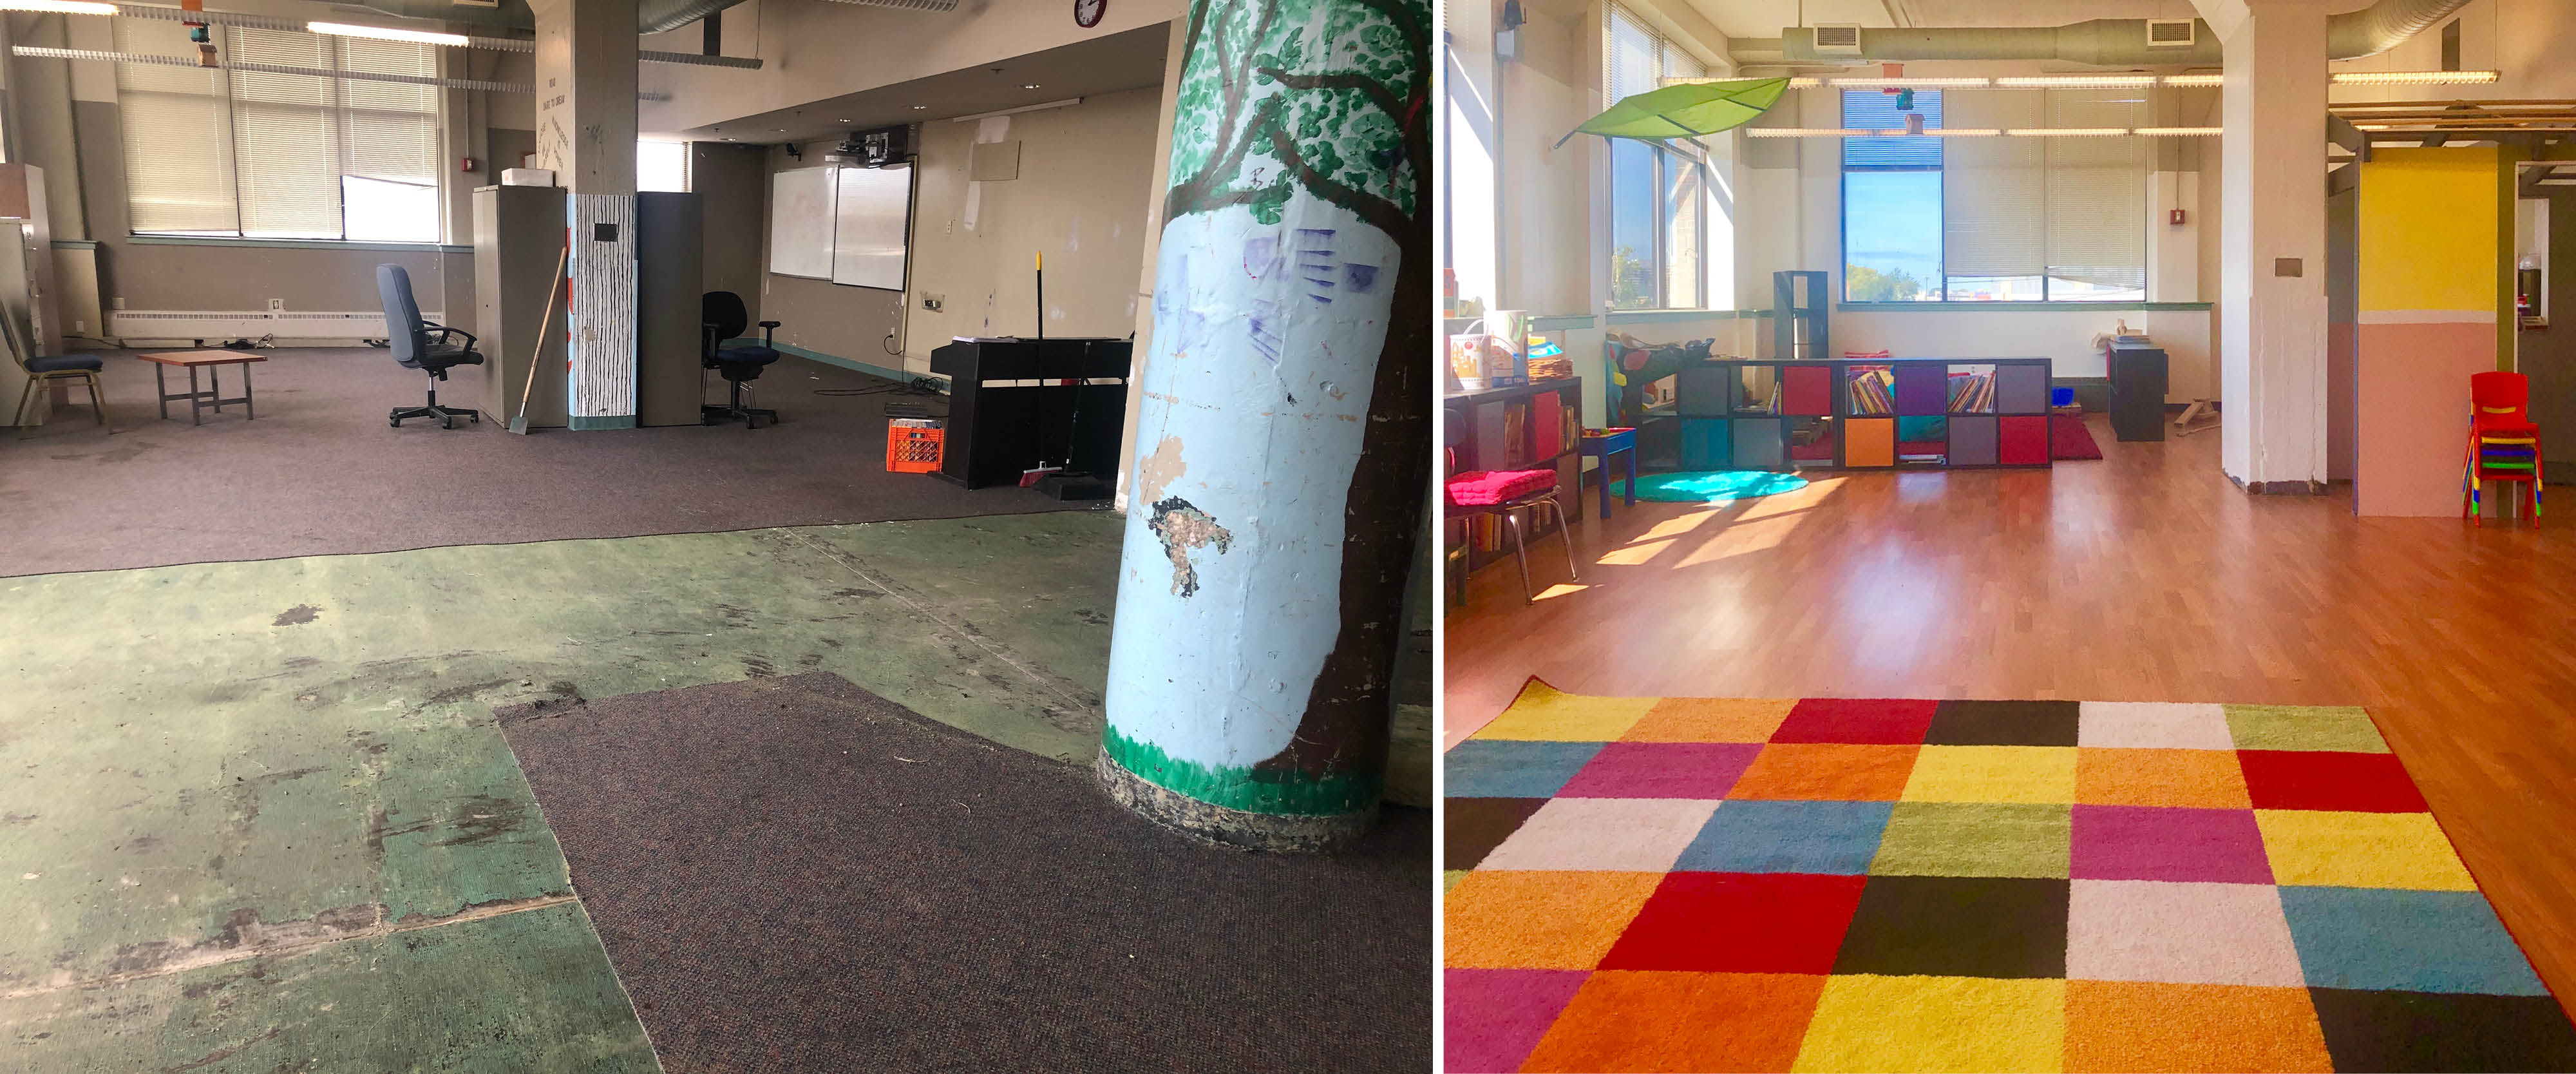 Two photos, on the left an empty space that needs renovating. On the right, after the space has been renovated. Therre are colorful chair, shelfs, a rug and materials for children.